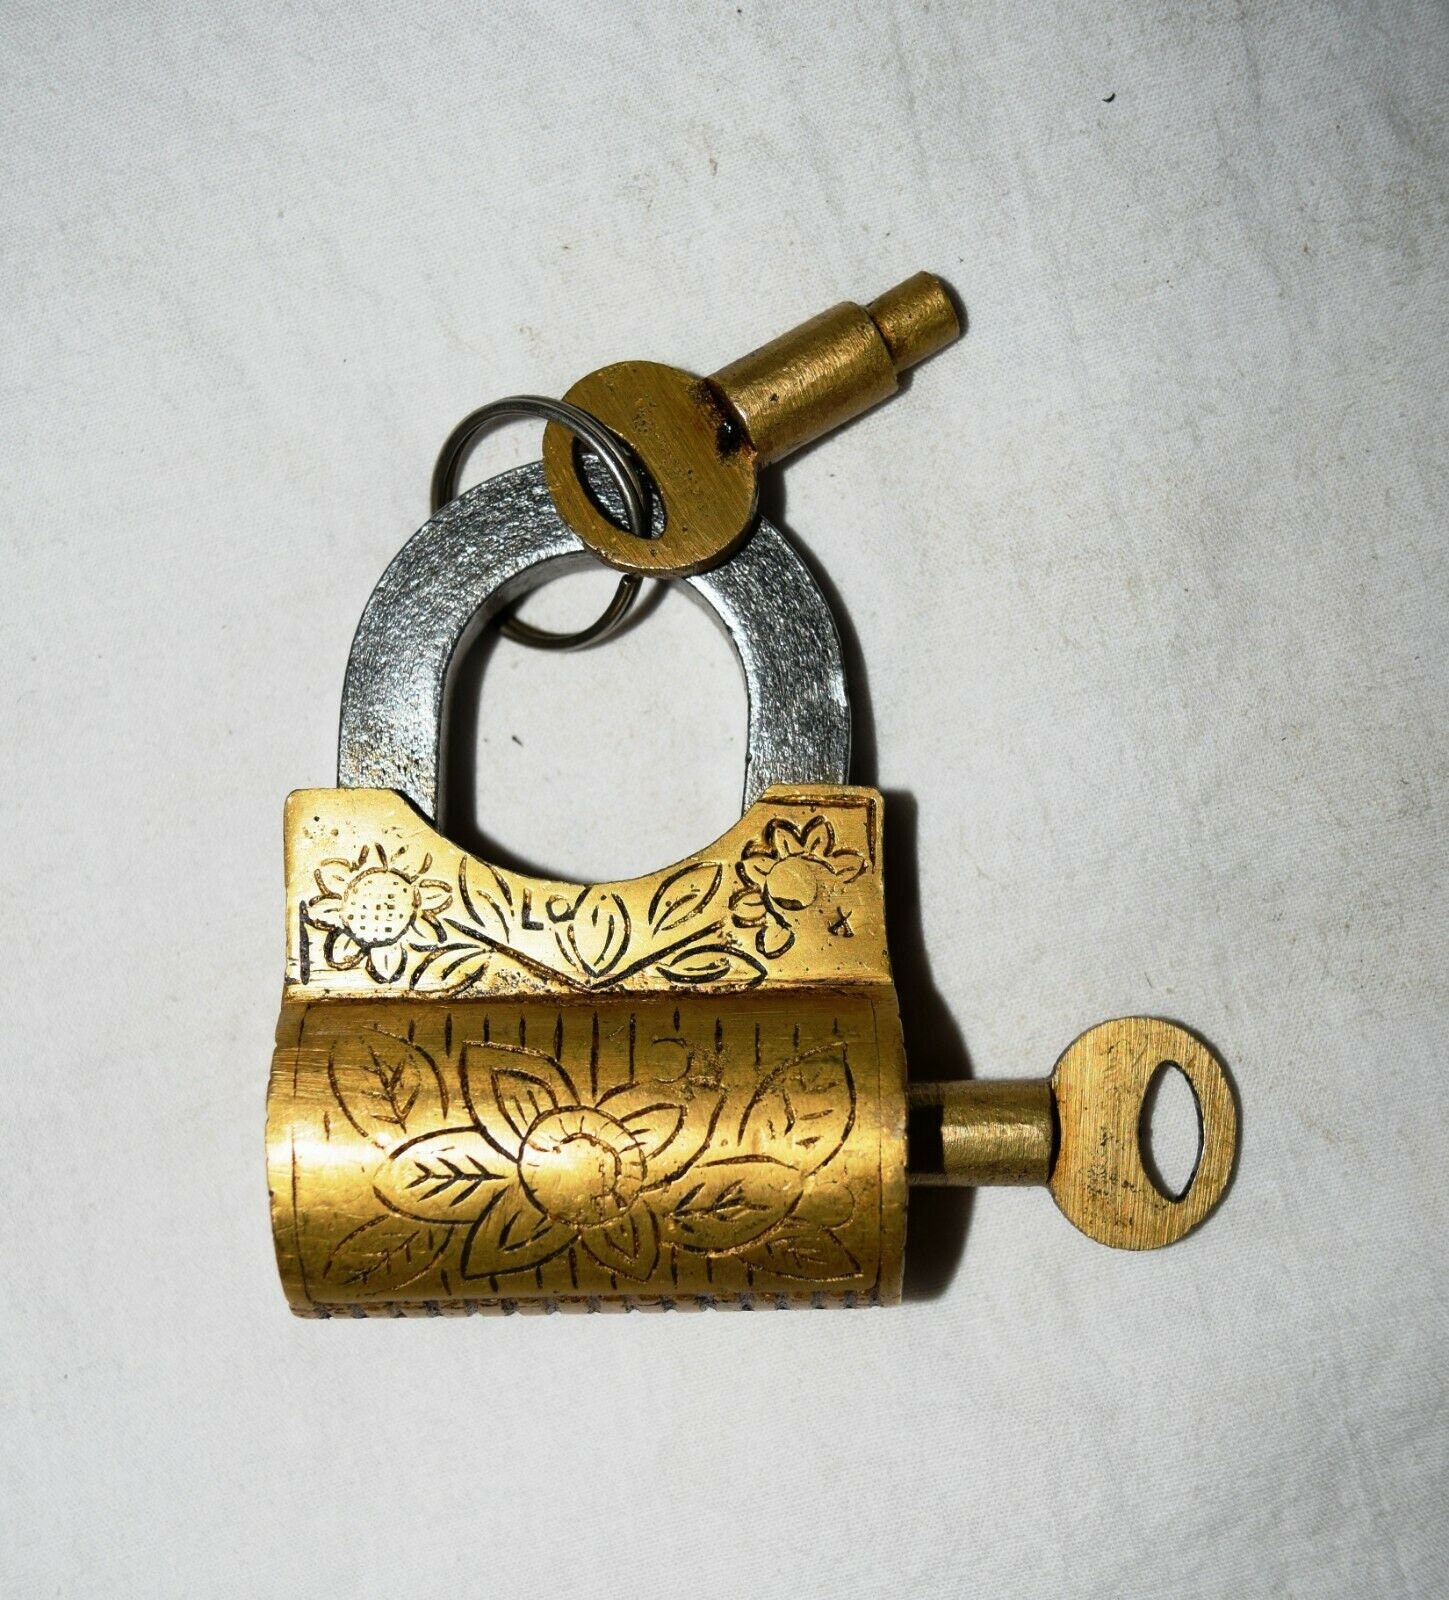 Details about   Golden Tricky Lock Brass Victorian Style Handmade Tricky Lock Puzzled Padlock BM 